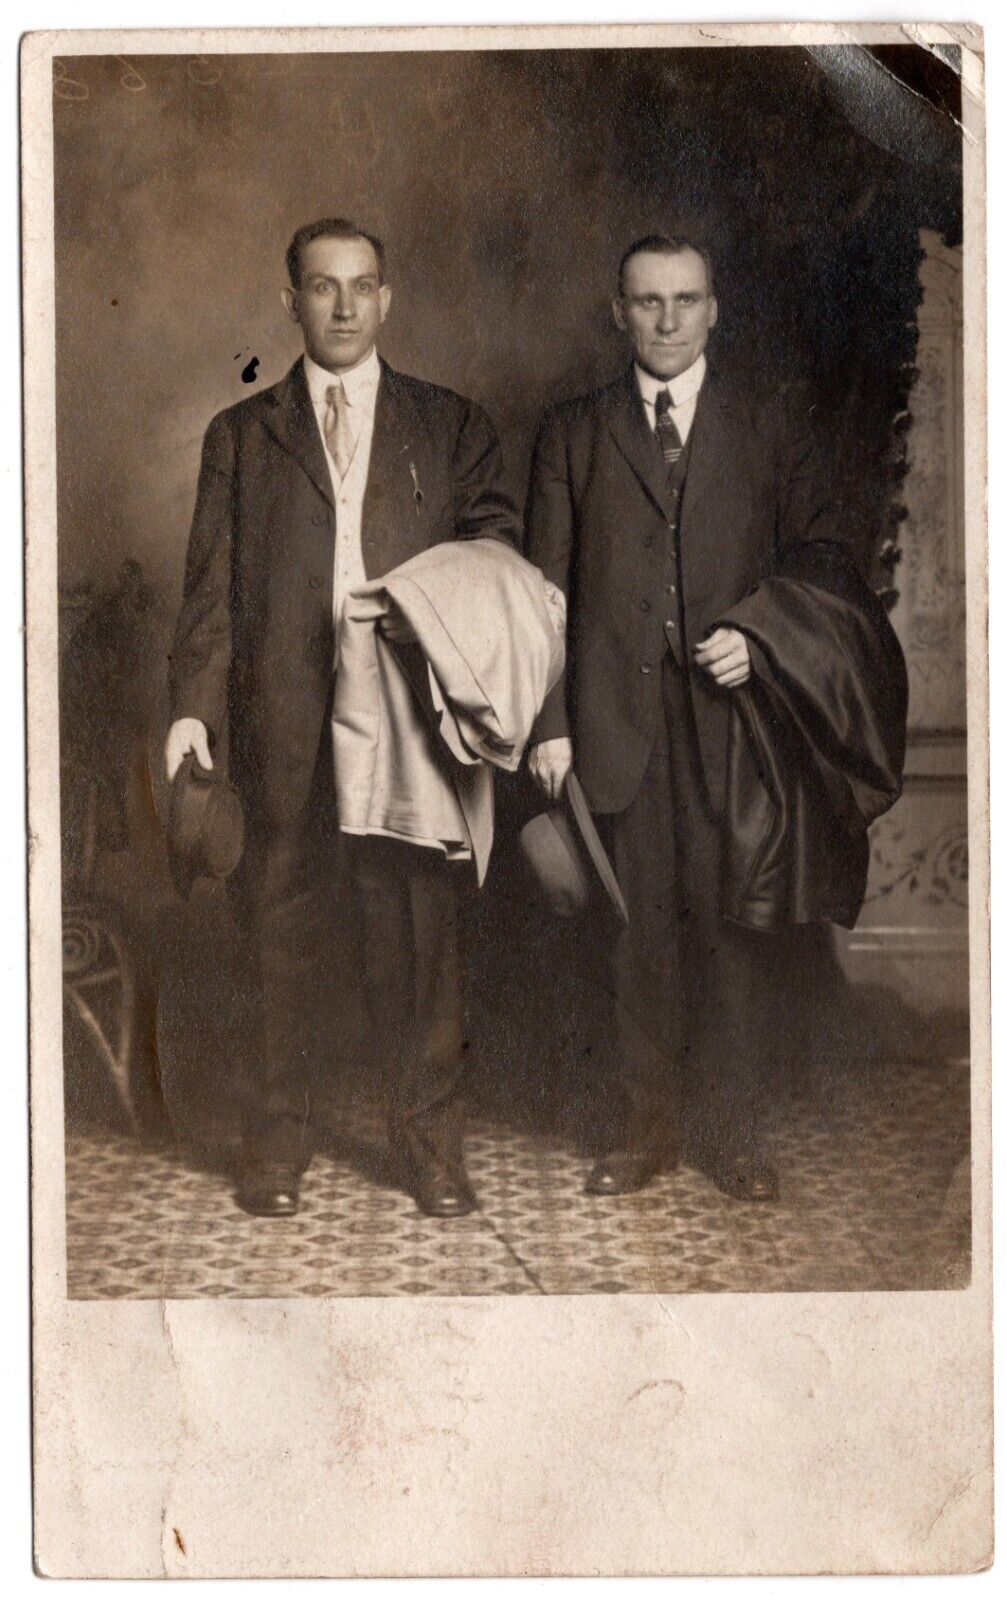 RPPC POSTCARD 1912 TWO HANDSOME YOUNG MEN HOLDING OVERCOATS POSTED